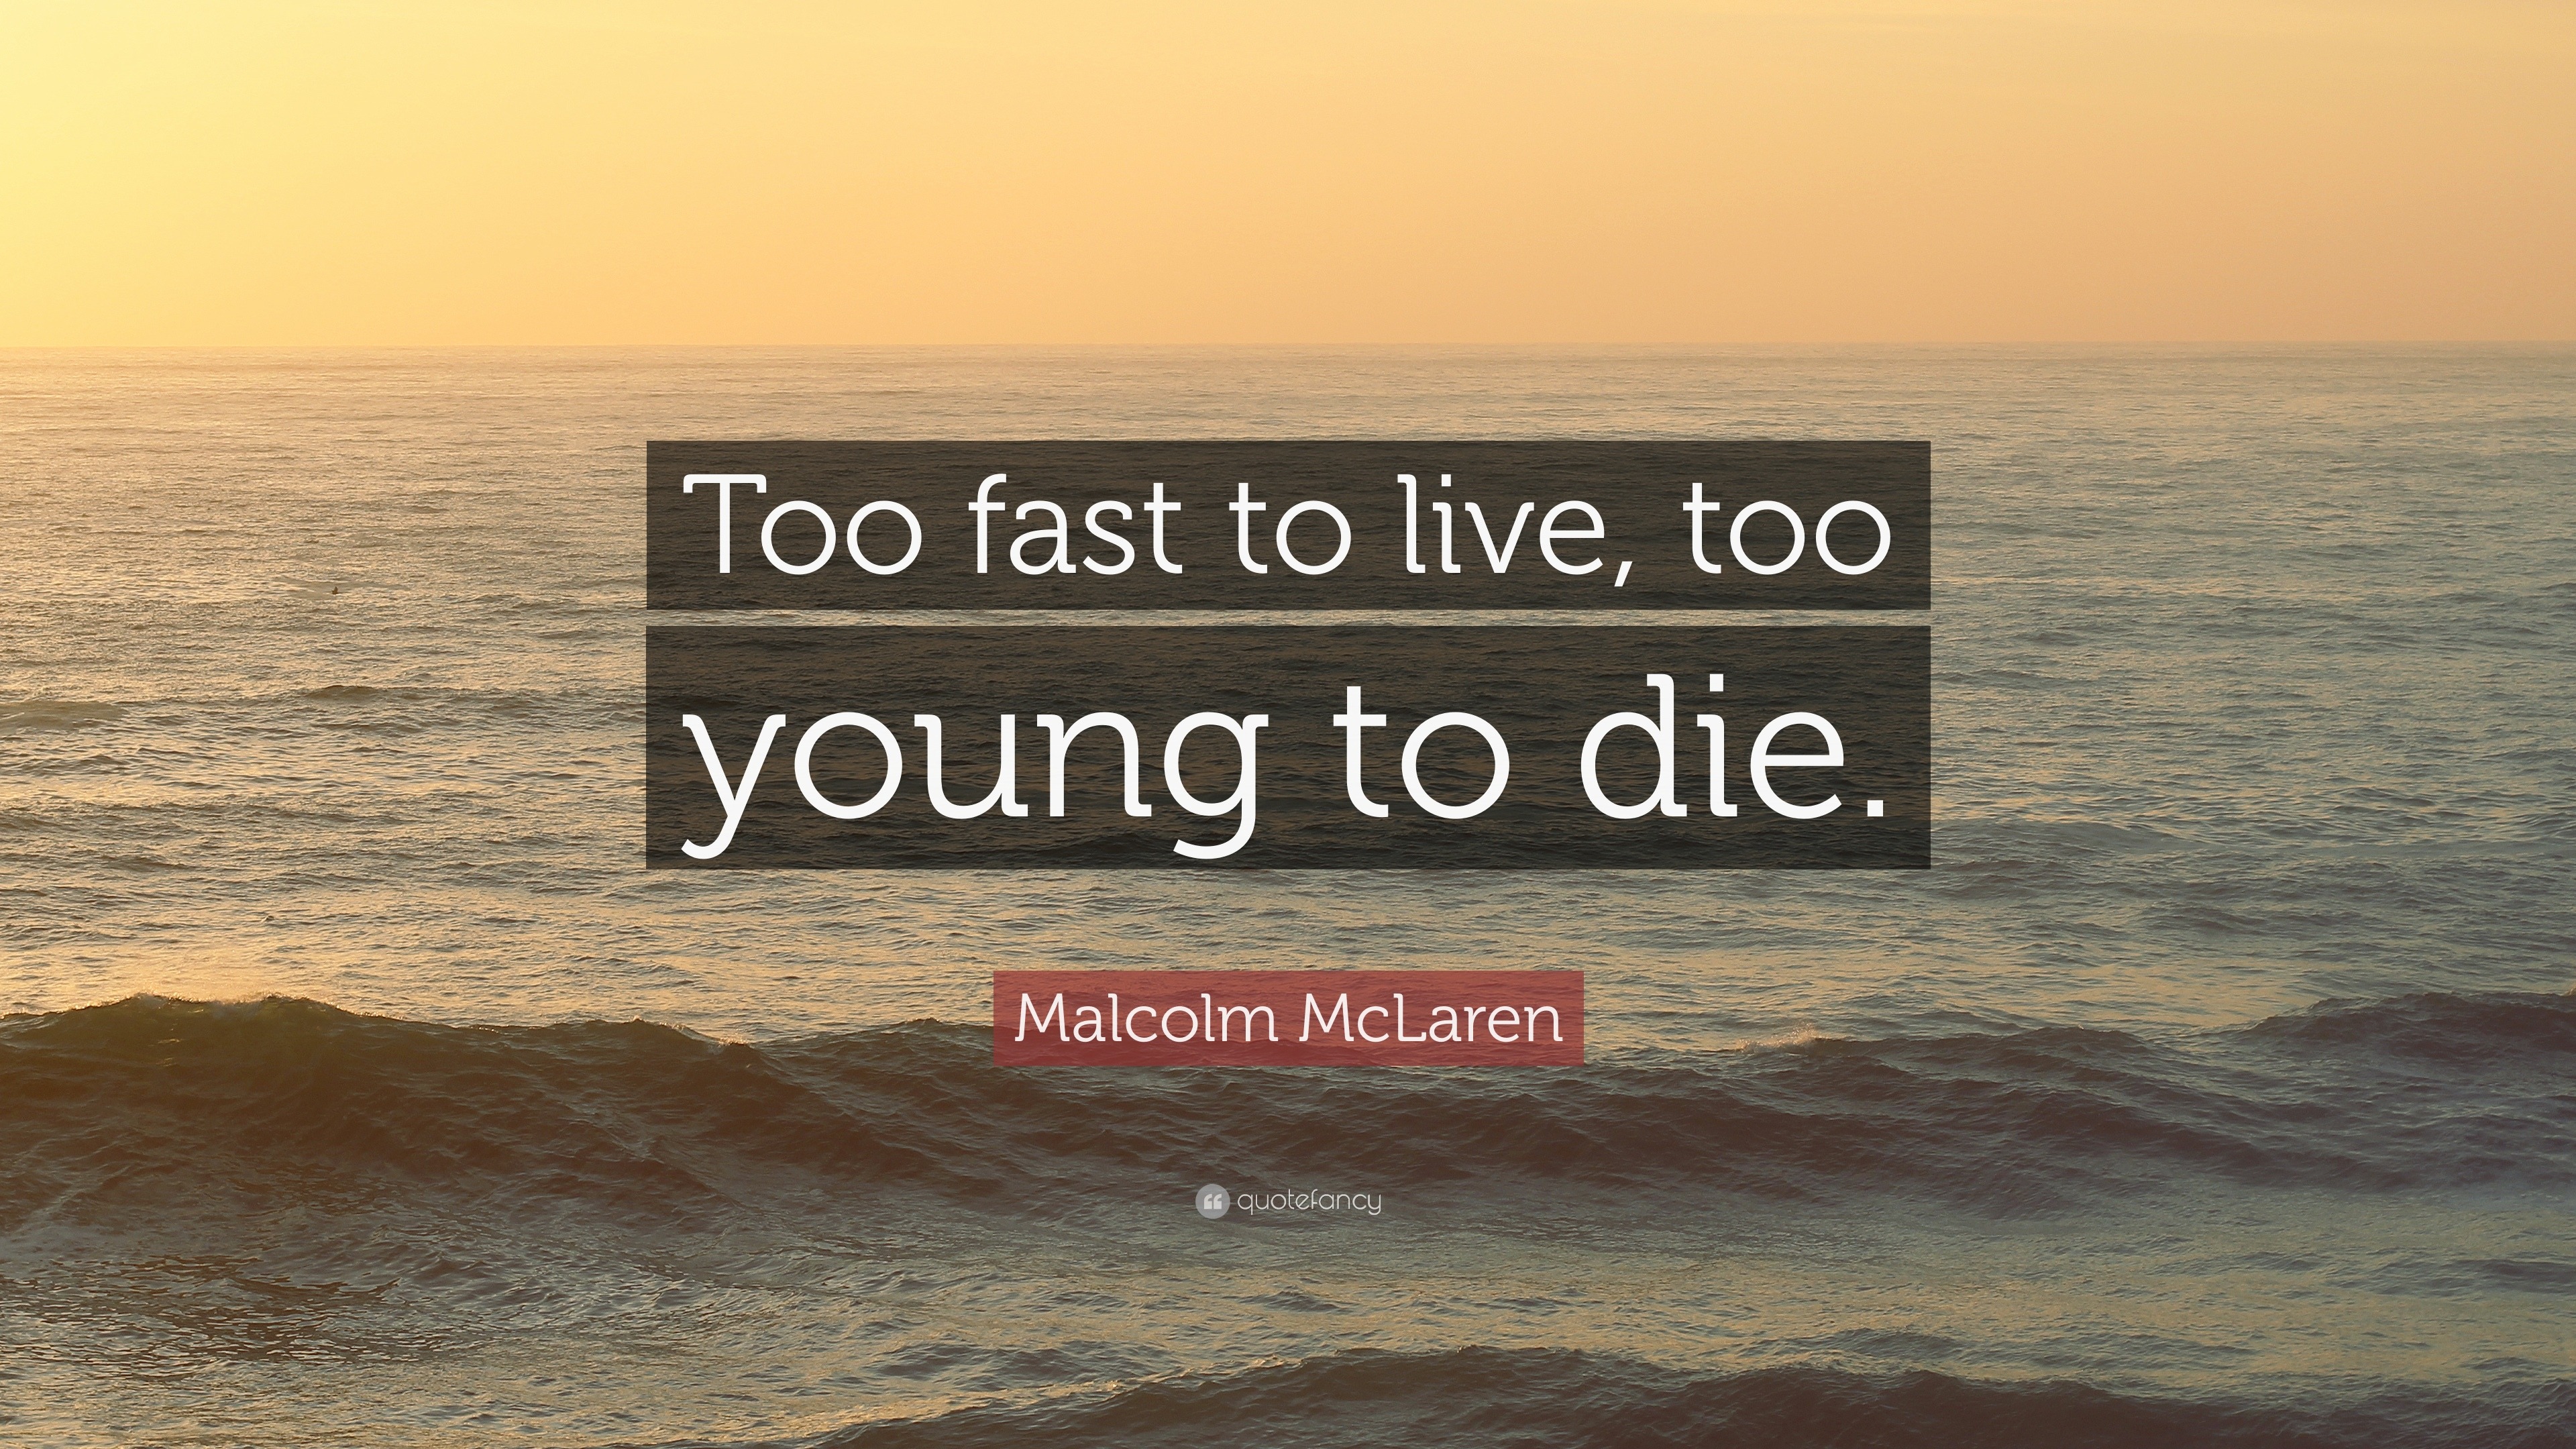 Malcolm McLaren Quote: “Too fast to live, too young to die.”